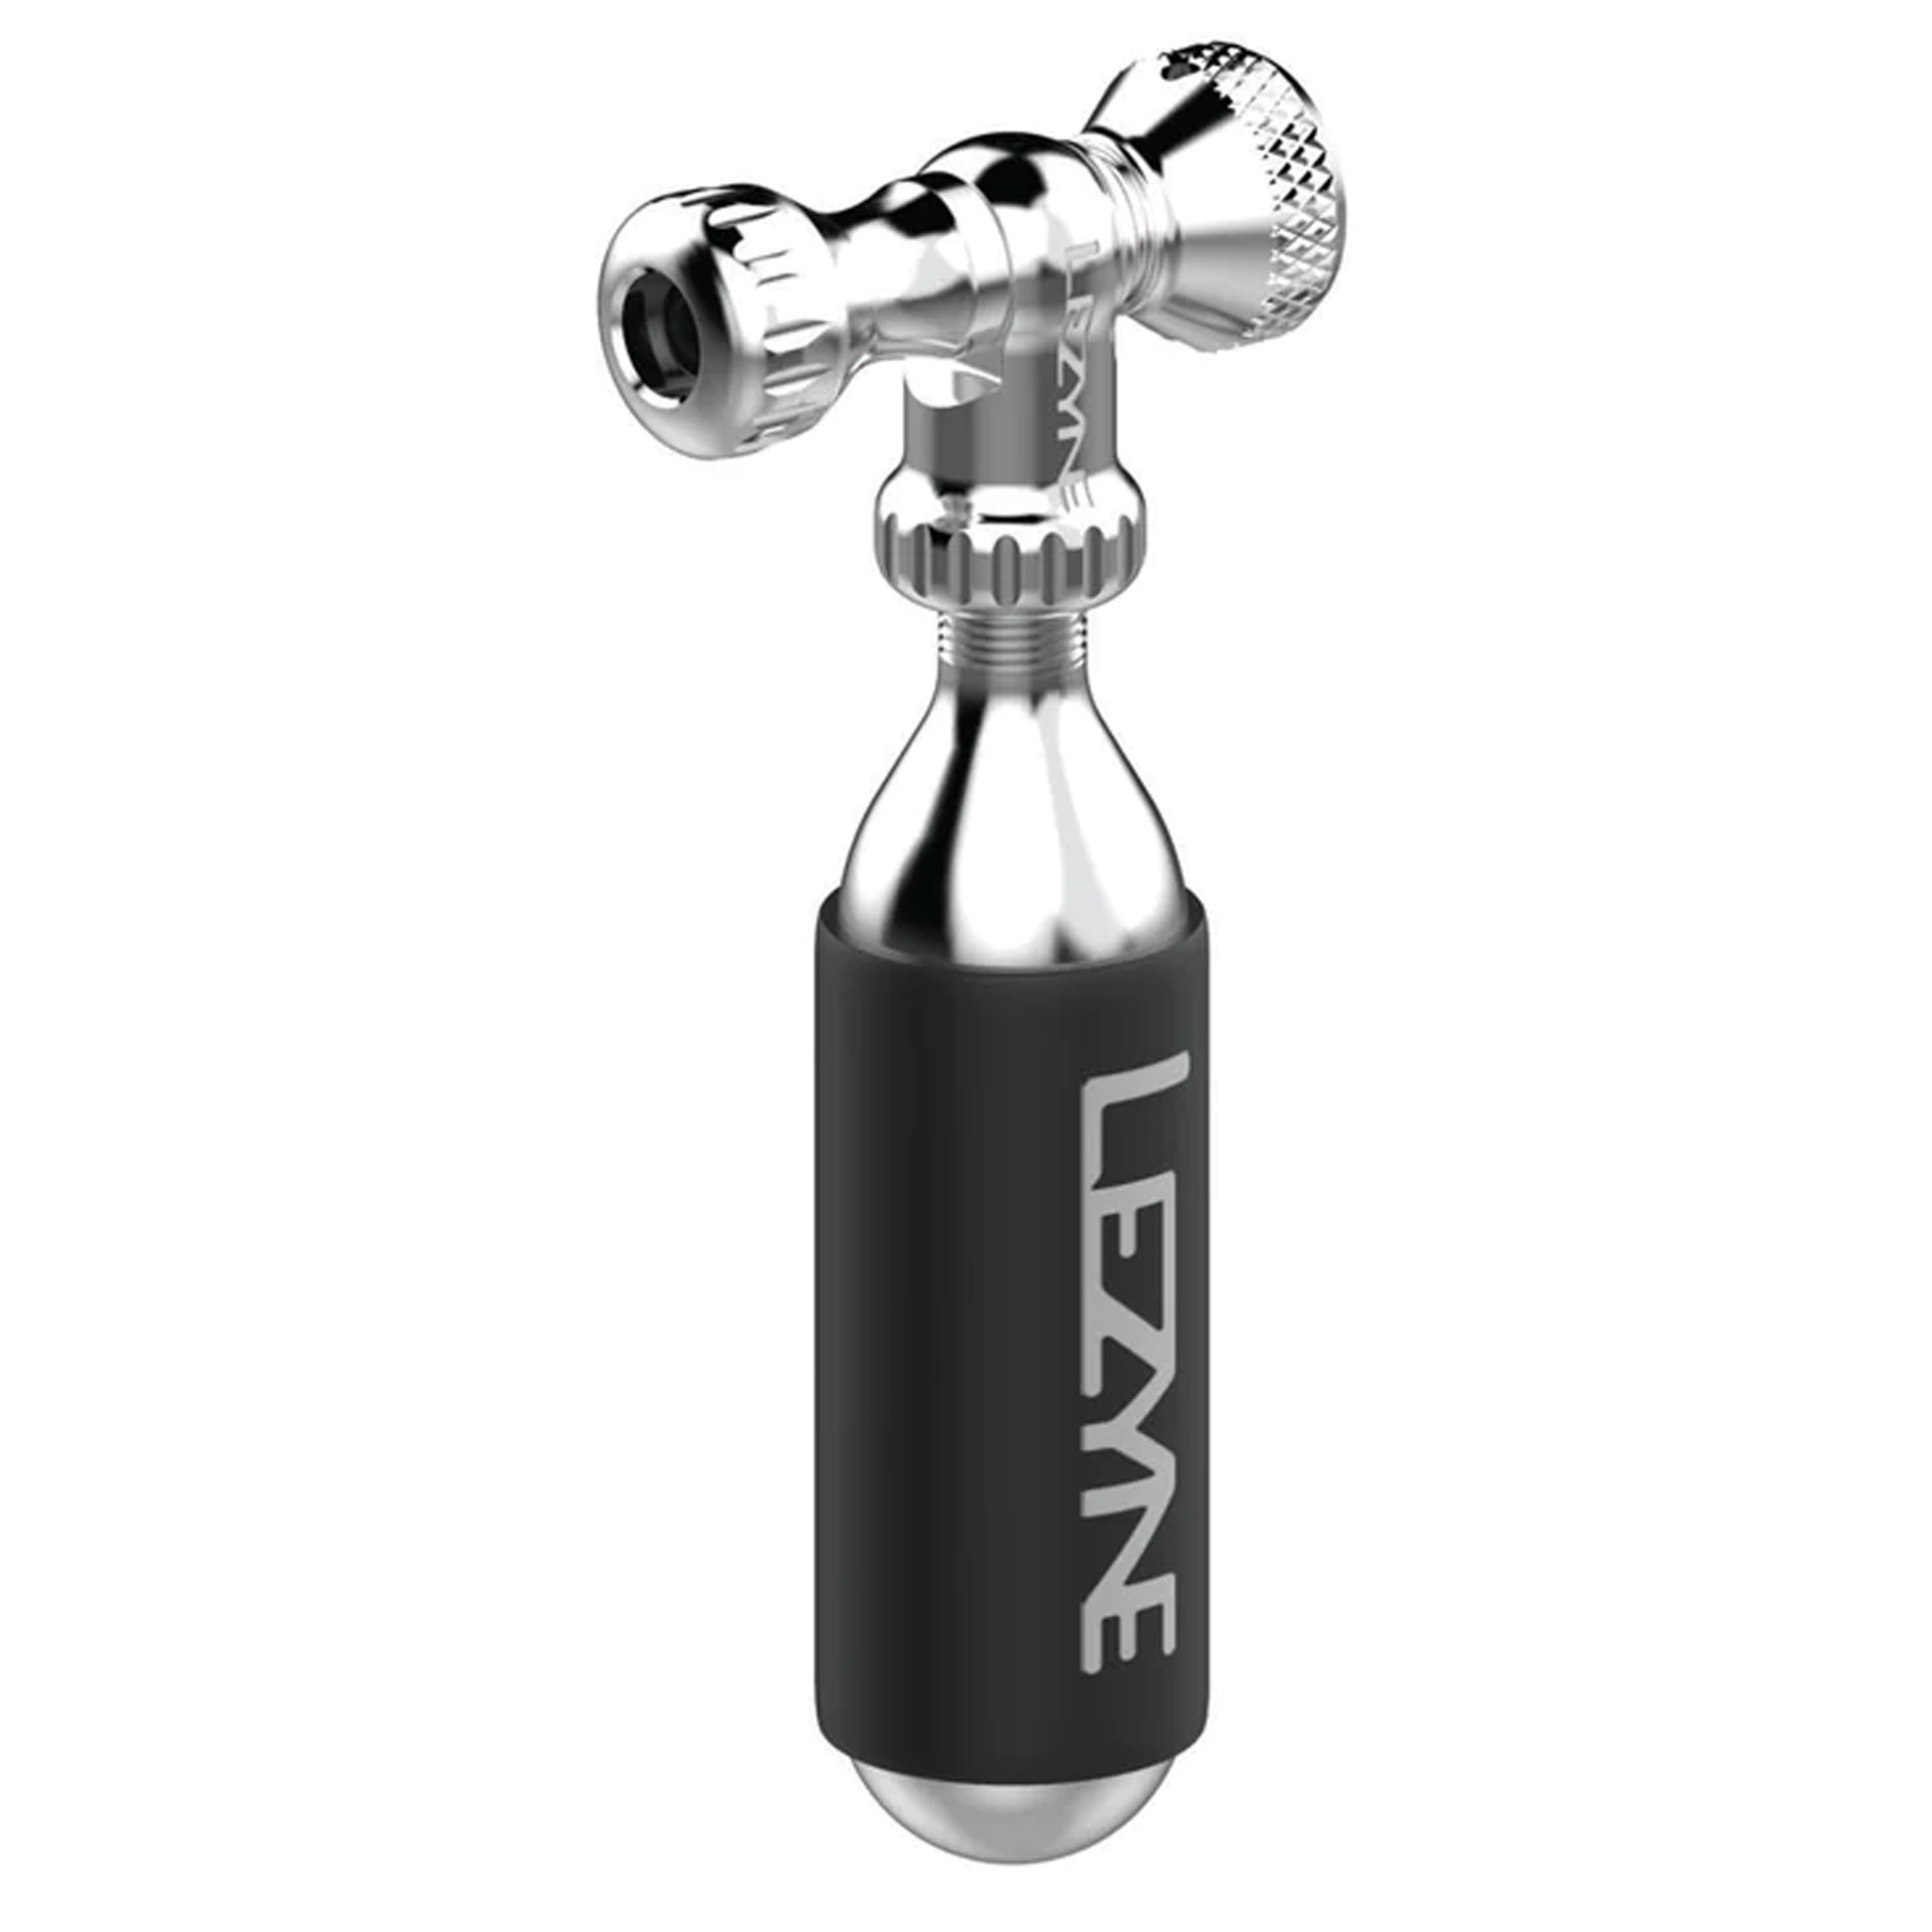 Lezyne Control Drive CO2 Inflator with 16g Cartridge, Silver